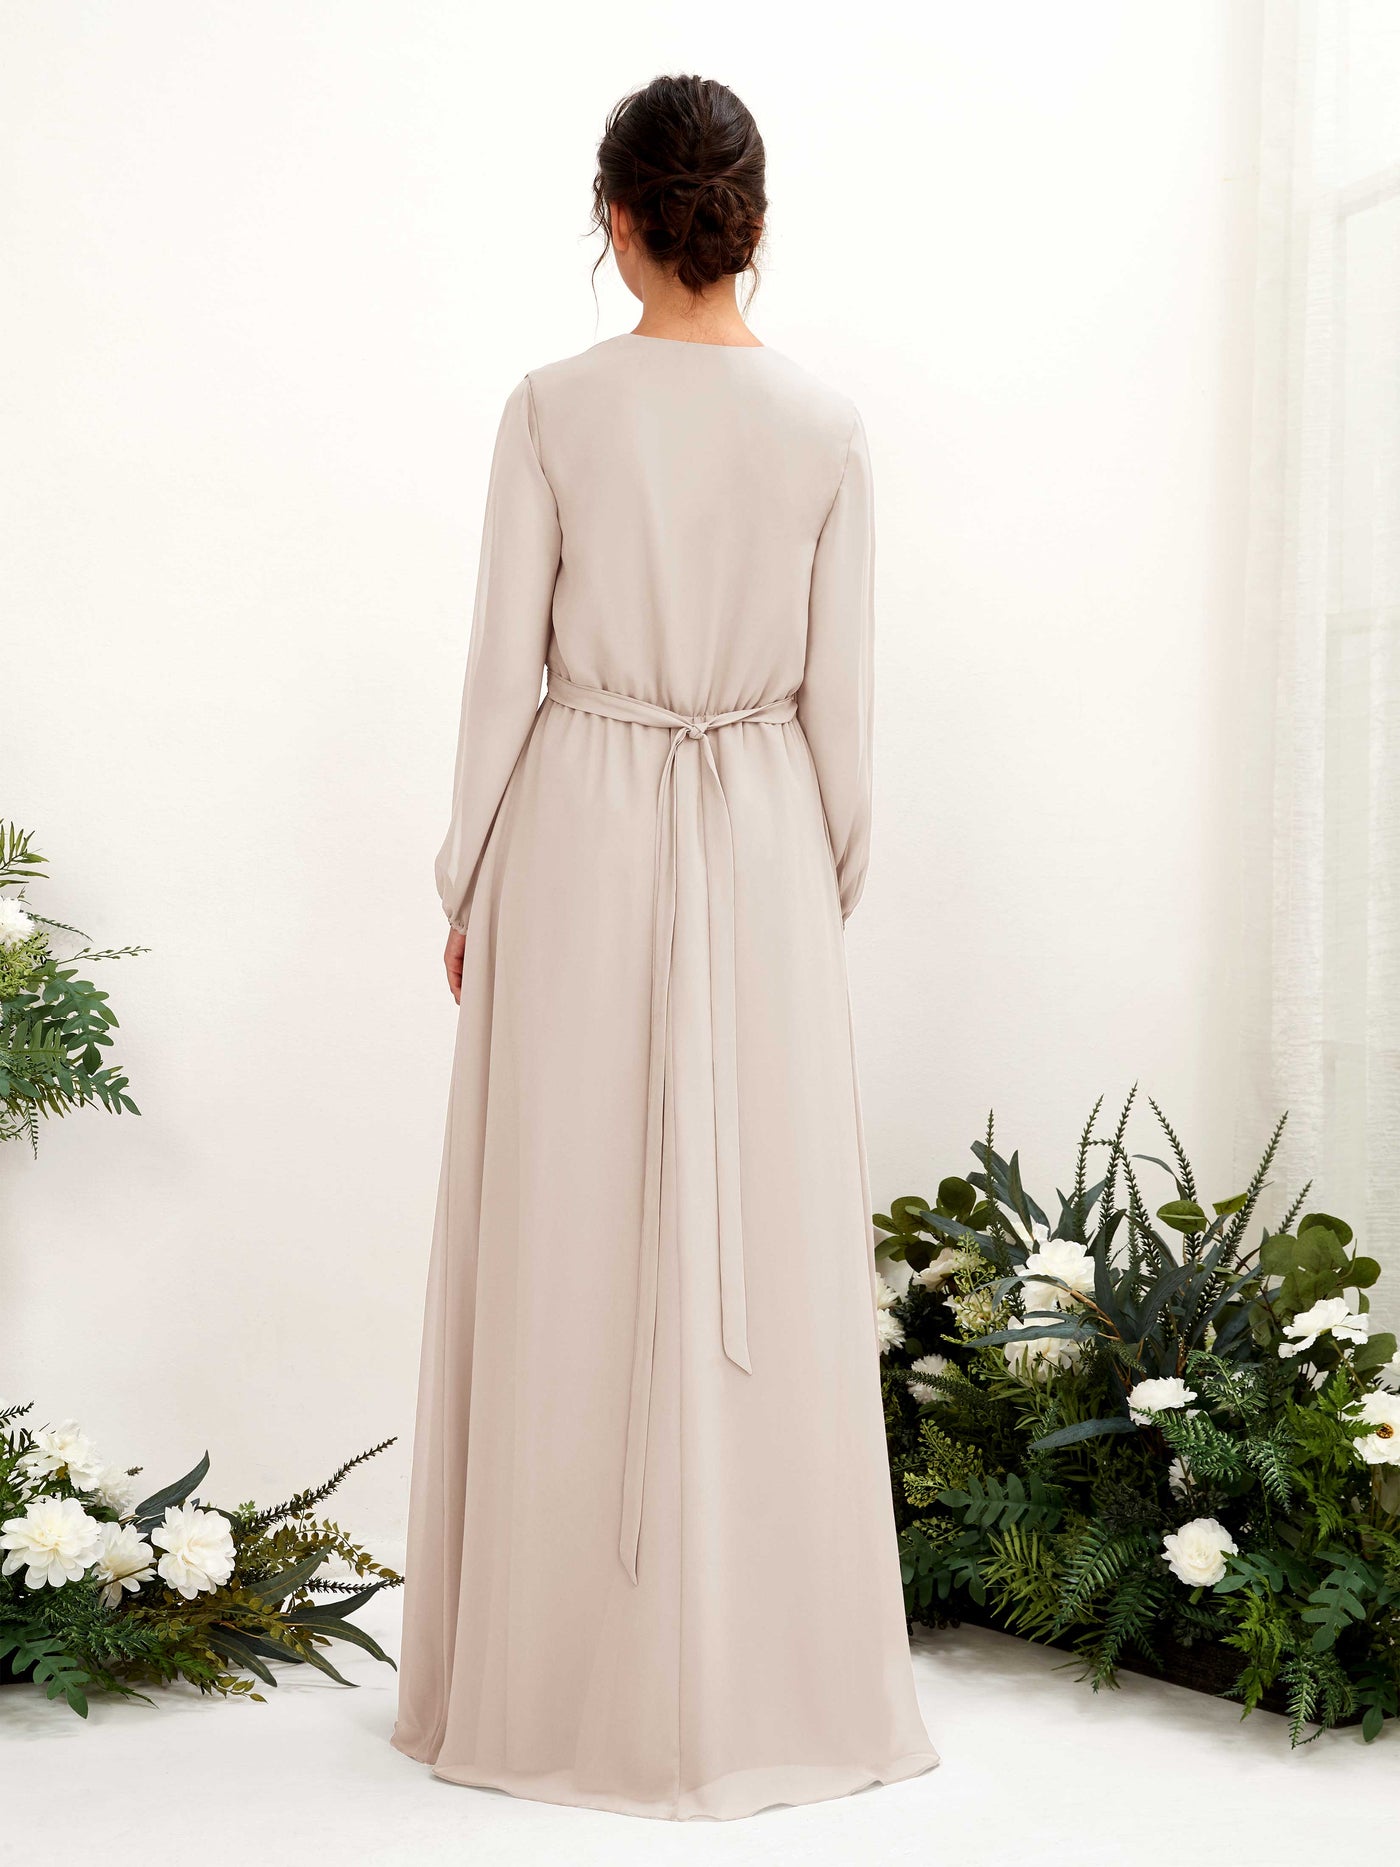 Champagne Bridesmaid Dresses Bridesmaid Dress A-line Chiffon V-neck Full Length Long Sleeves Wedding Party Dress (81223216)#color_champagne